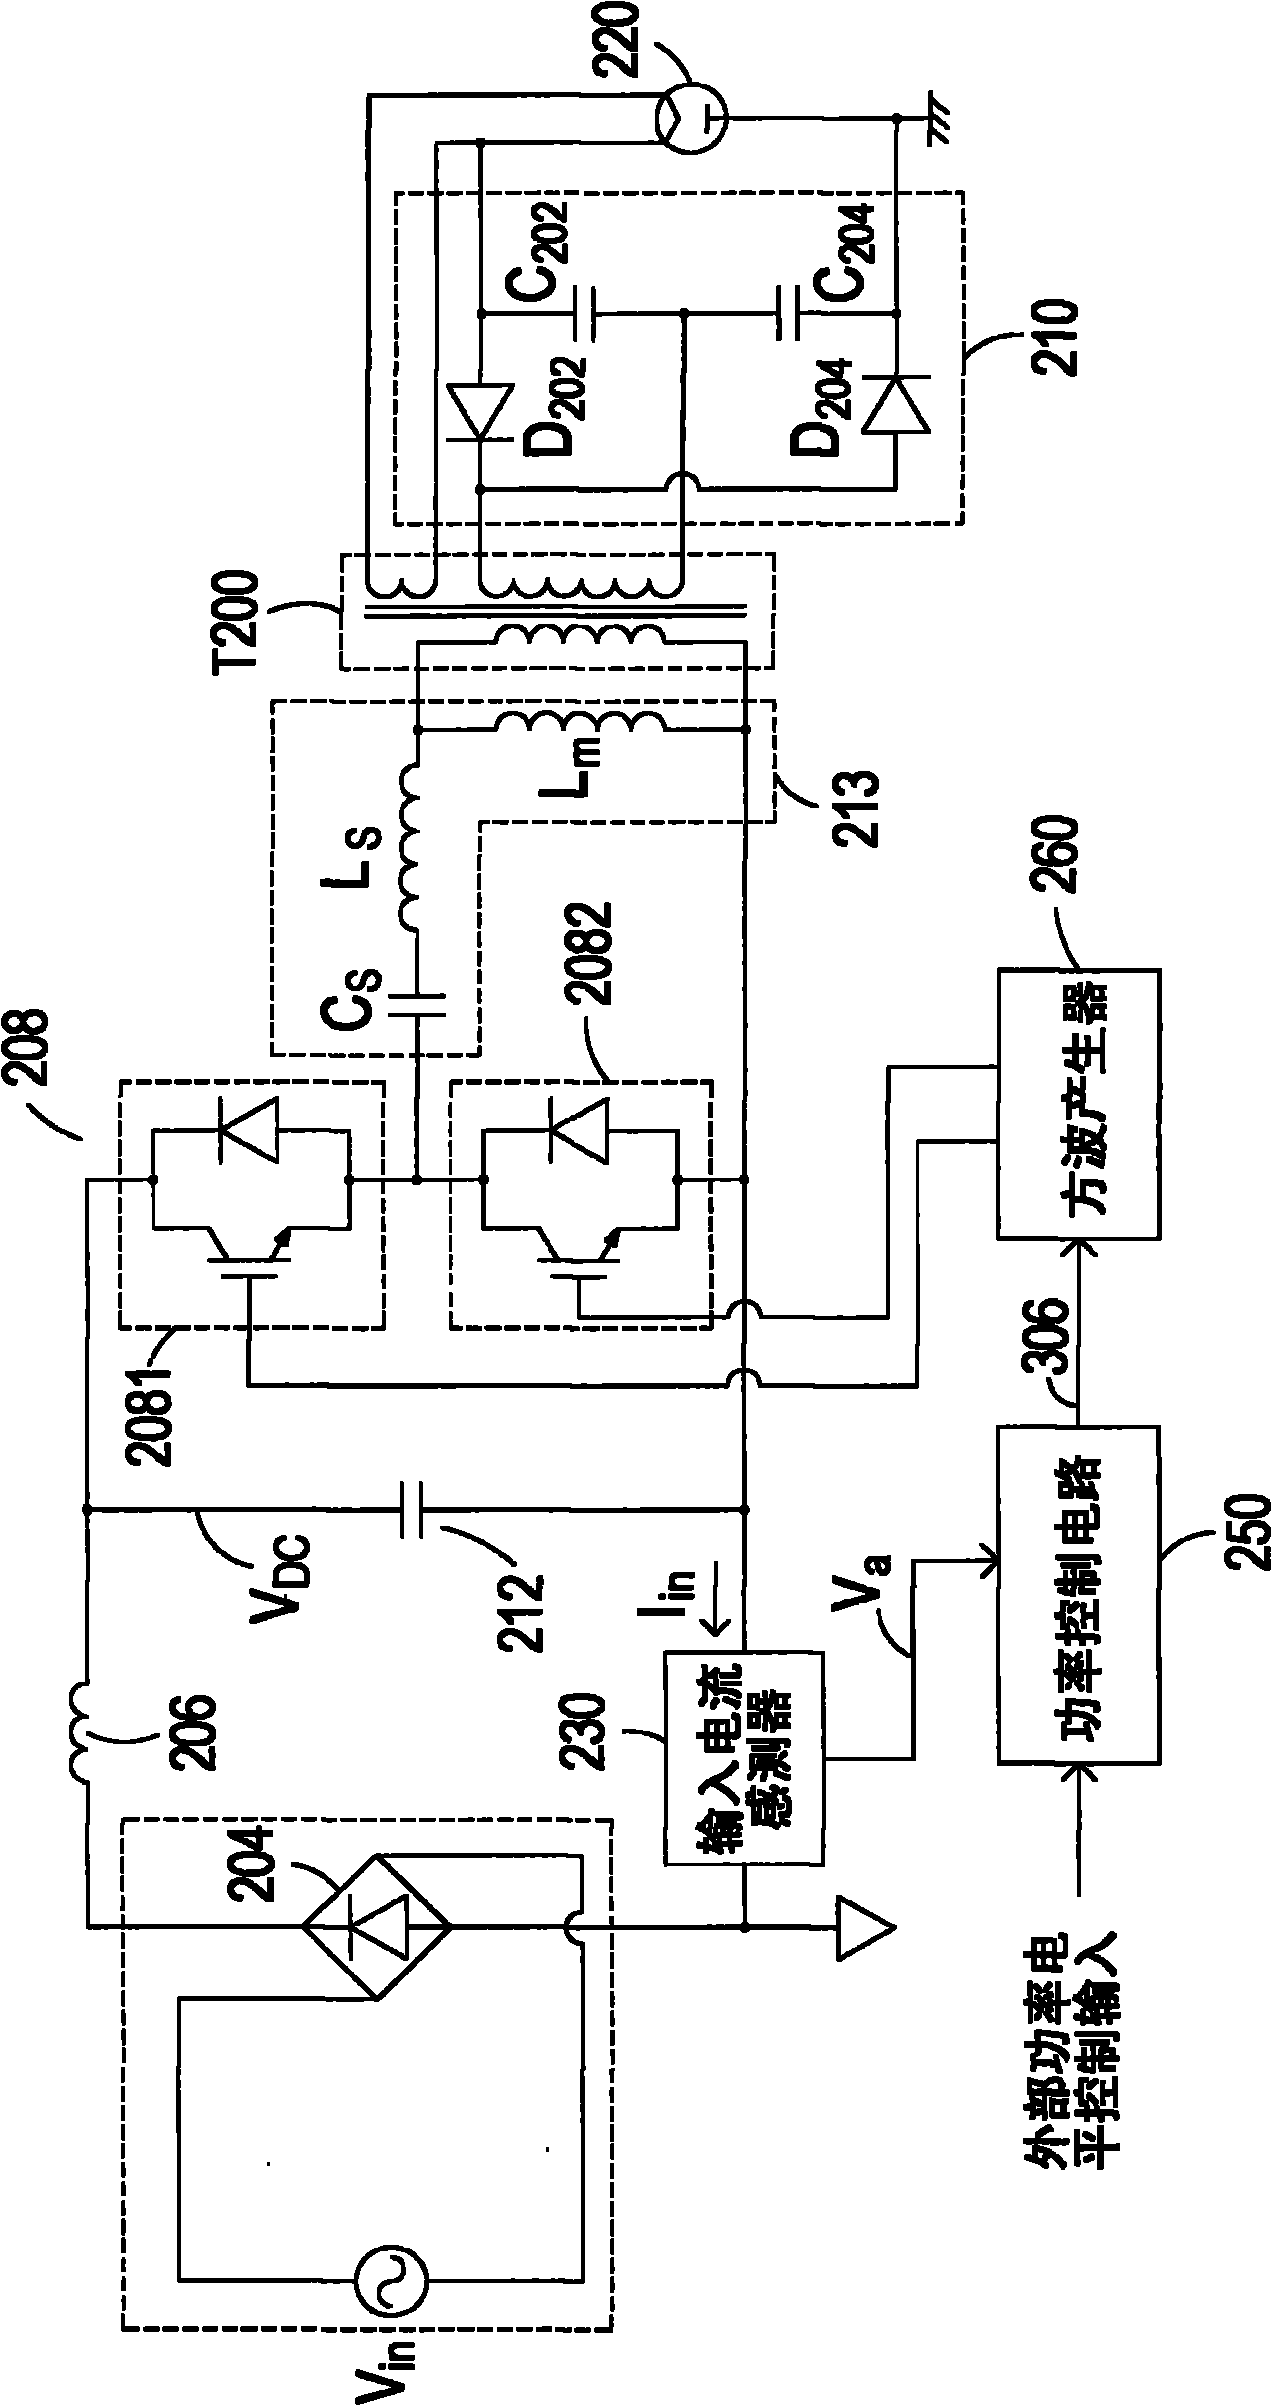 Alternating-current to direct-current converter and control circuit thereof